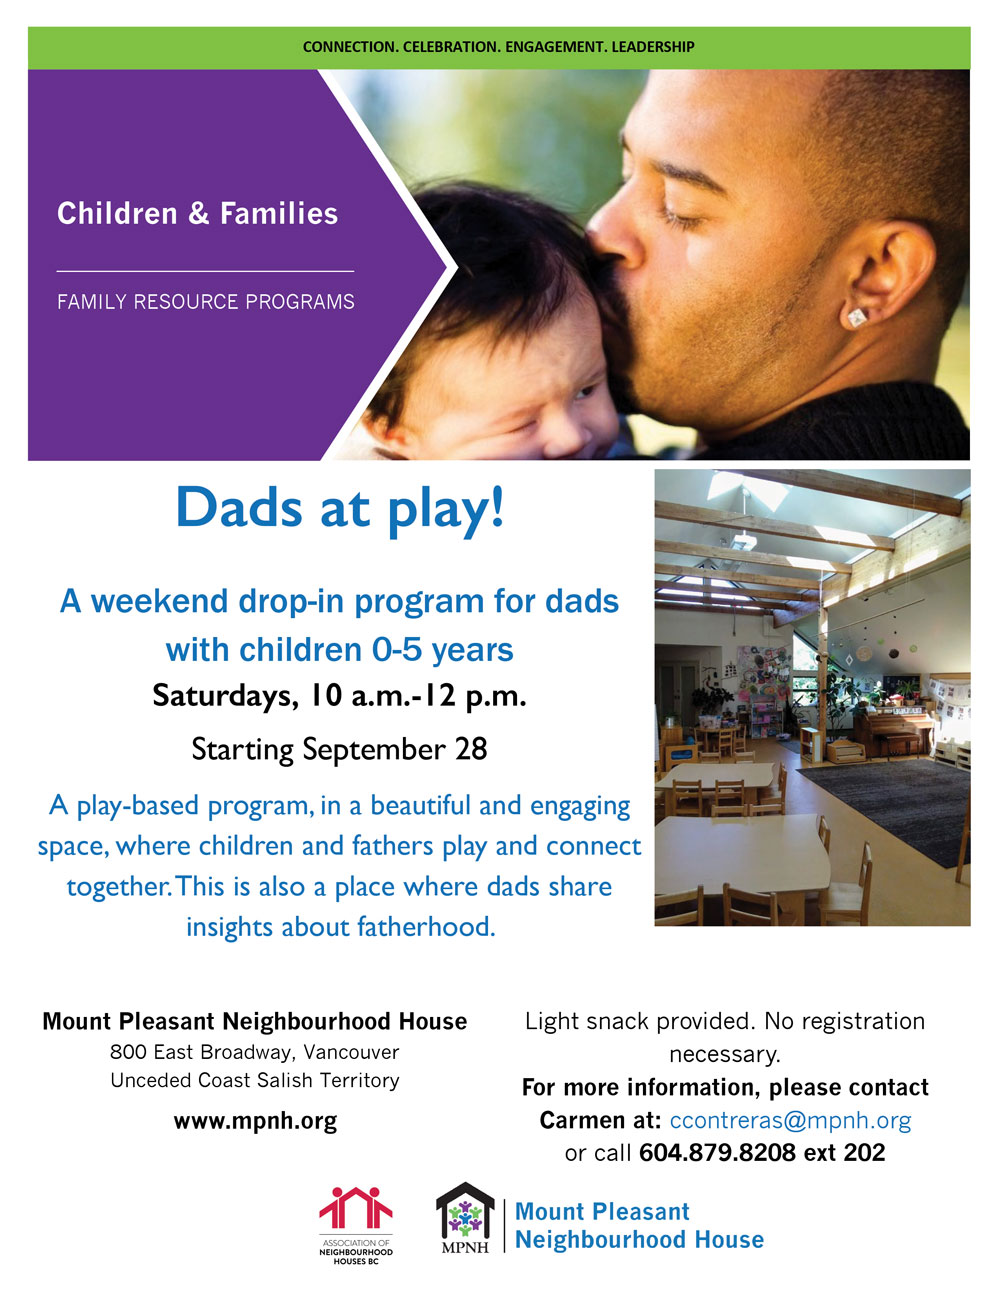 An image of the poster with program details, featuring a photo of a dad kissing his baby's head